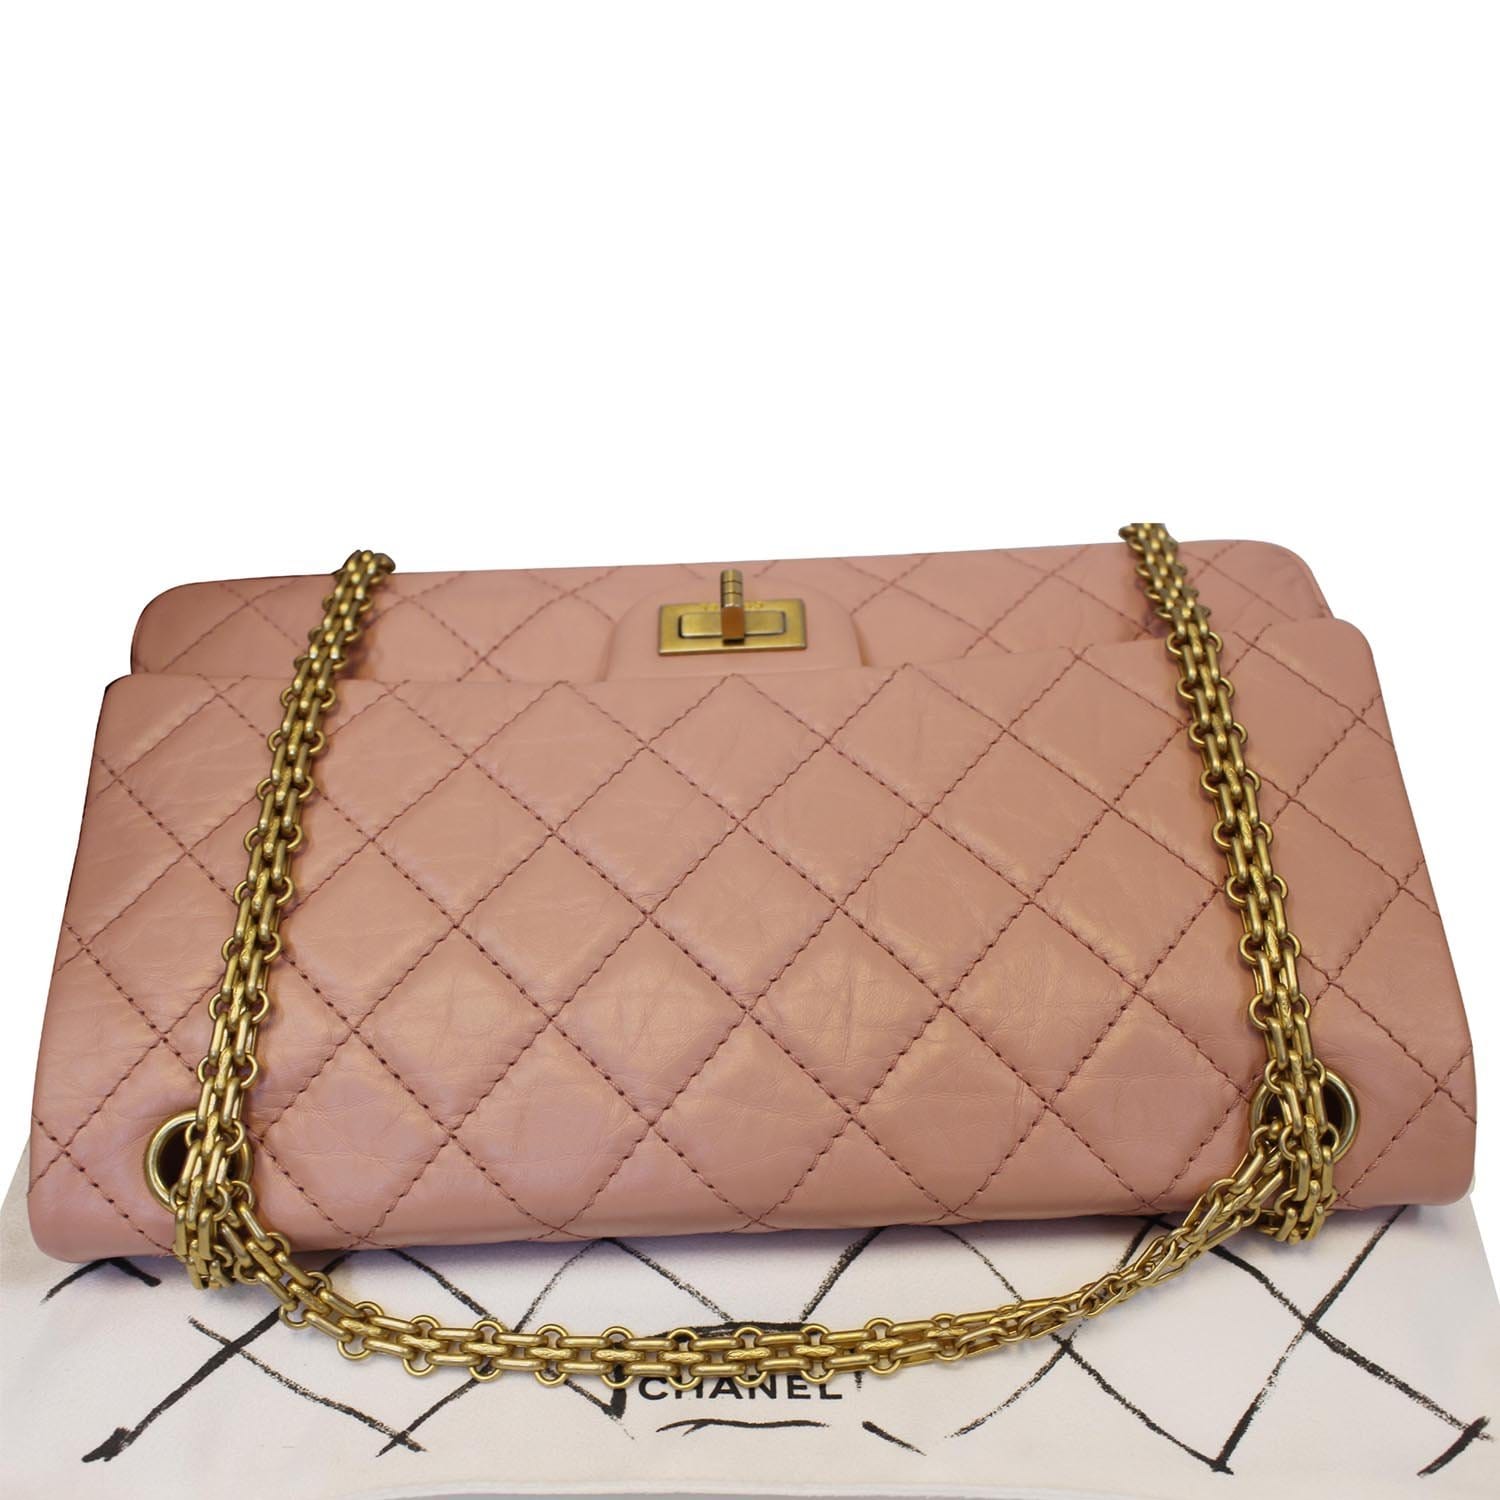 Chanel Classic 2.55 Medium Double Flap Bag in Pale Pink Caviar with Shiny  Silver Hardware - SOLD